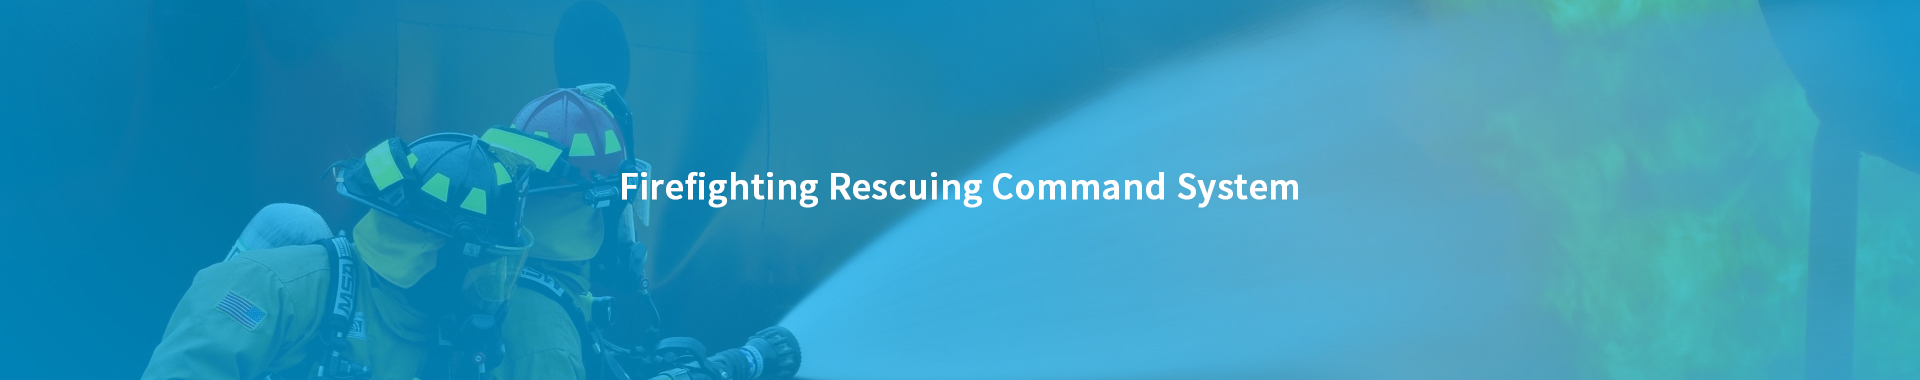 Product—Firefighting Rescuing Command System